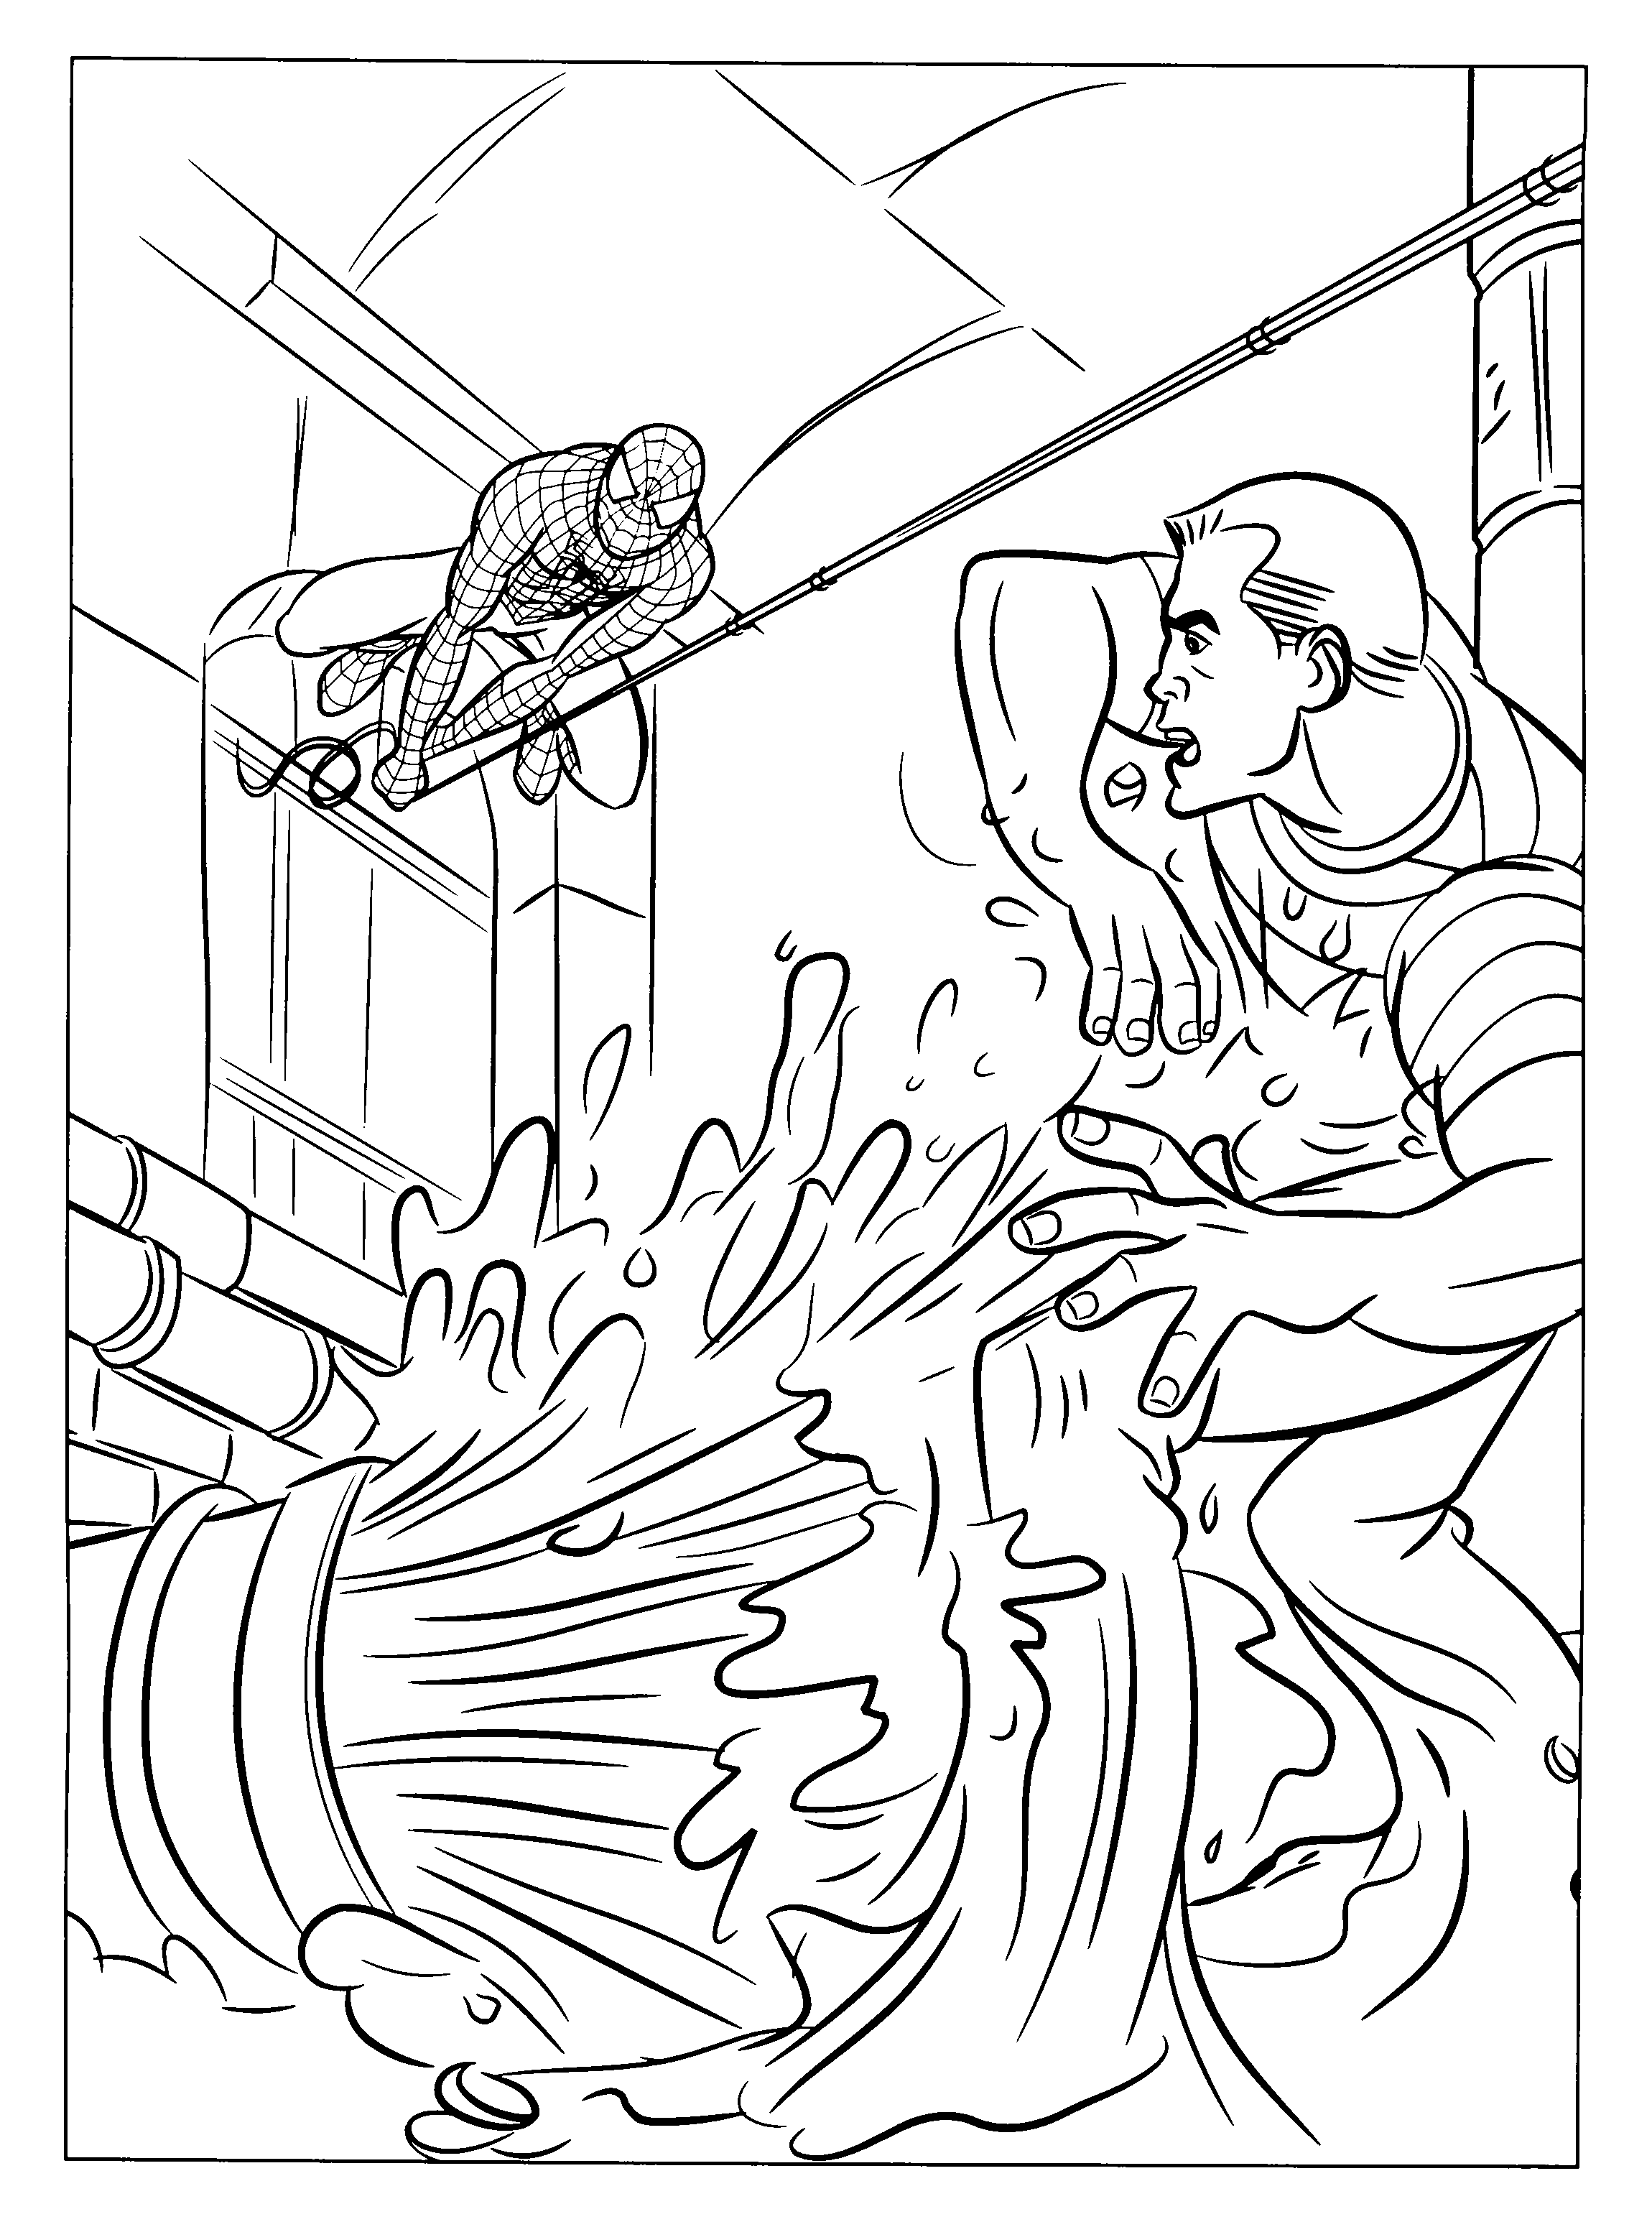 Spiderman Coloring pages | Kids coloring pages | Free coloring pages | #23